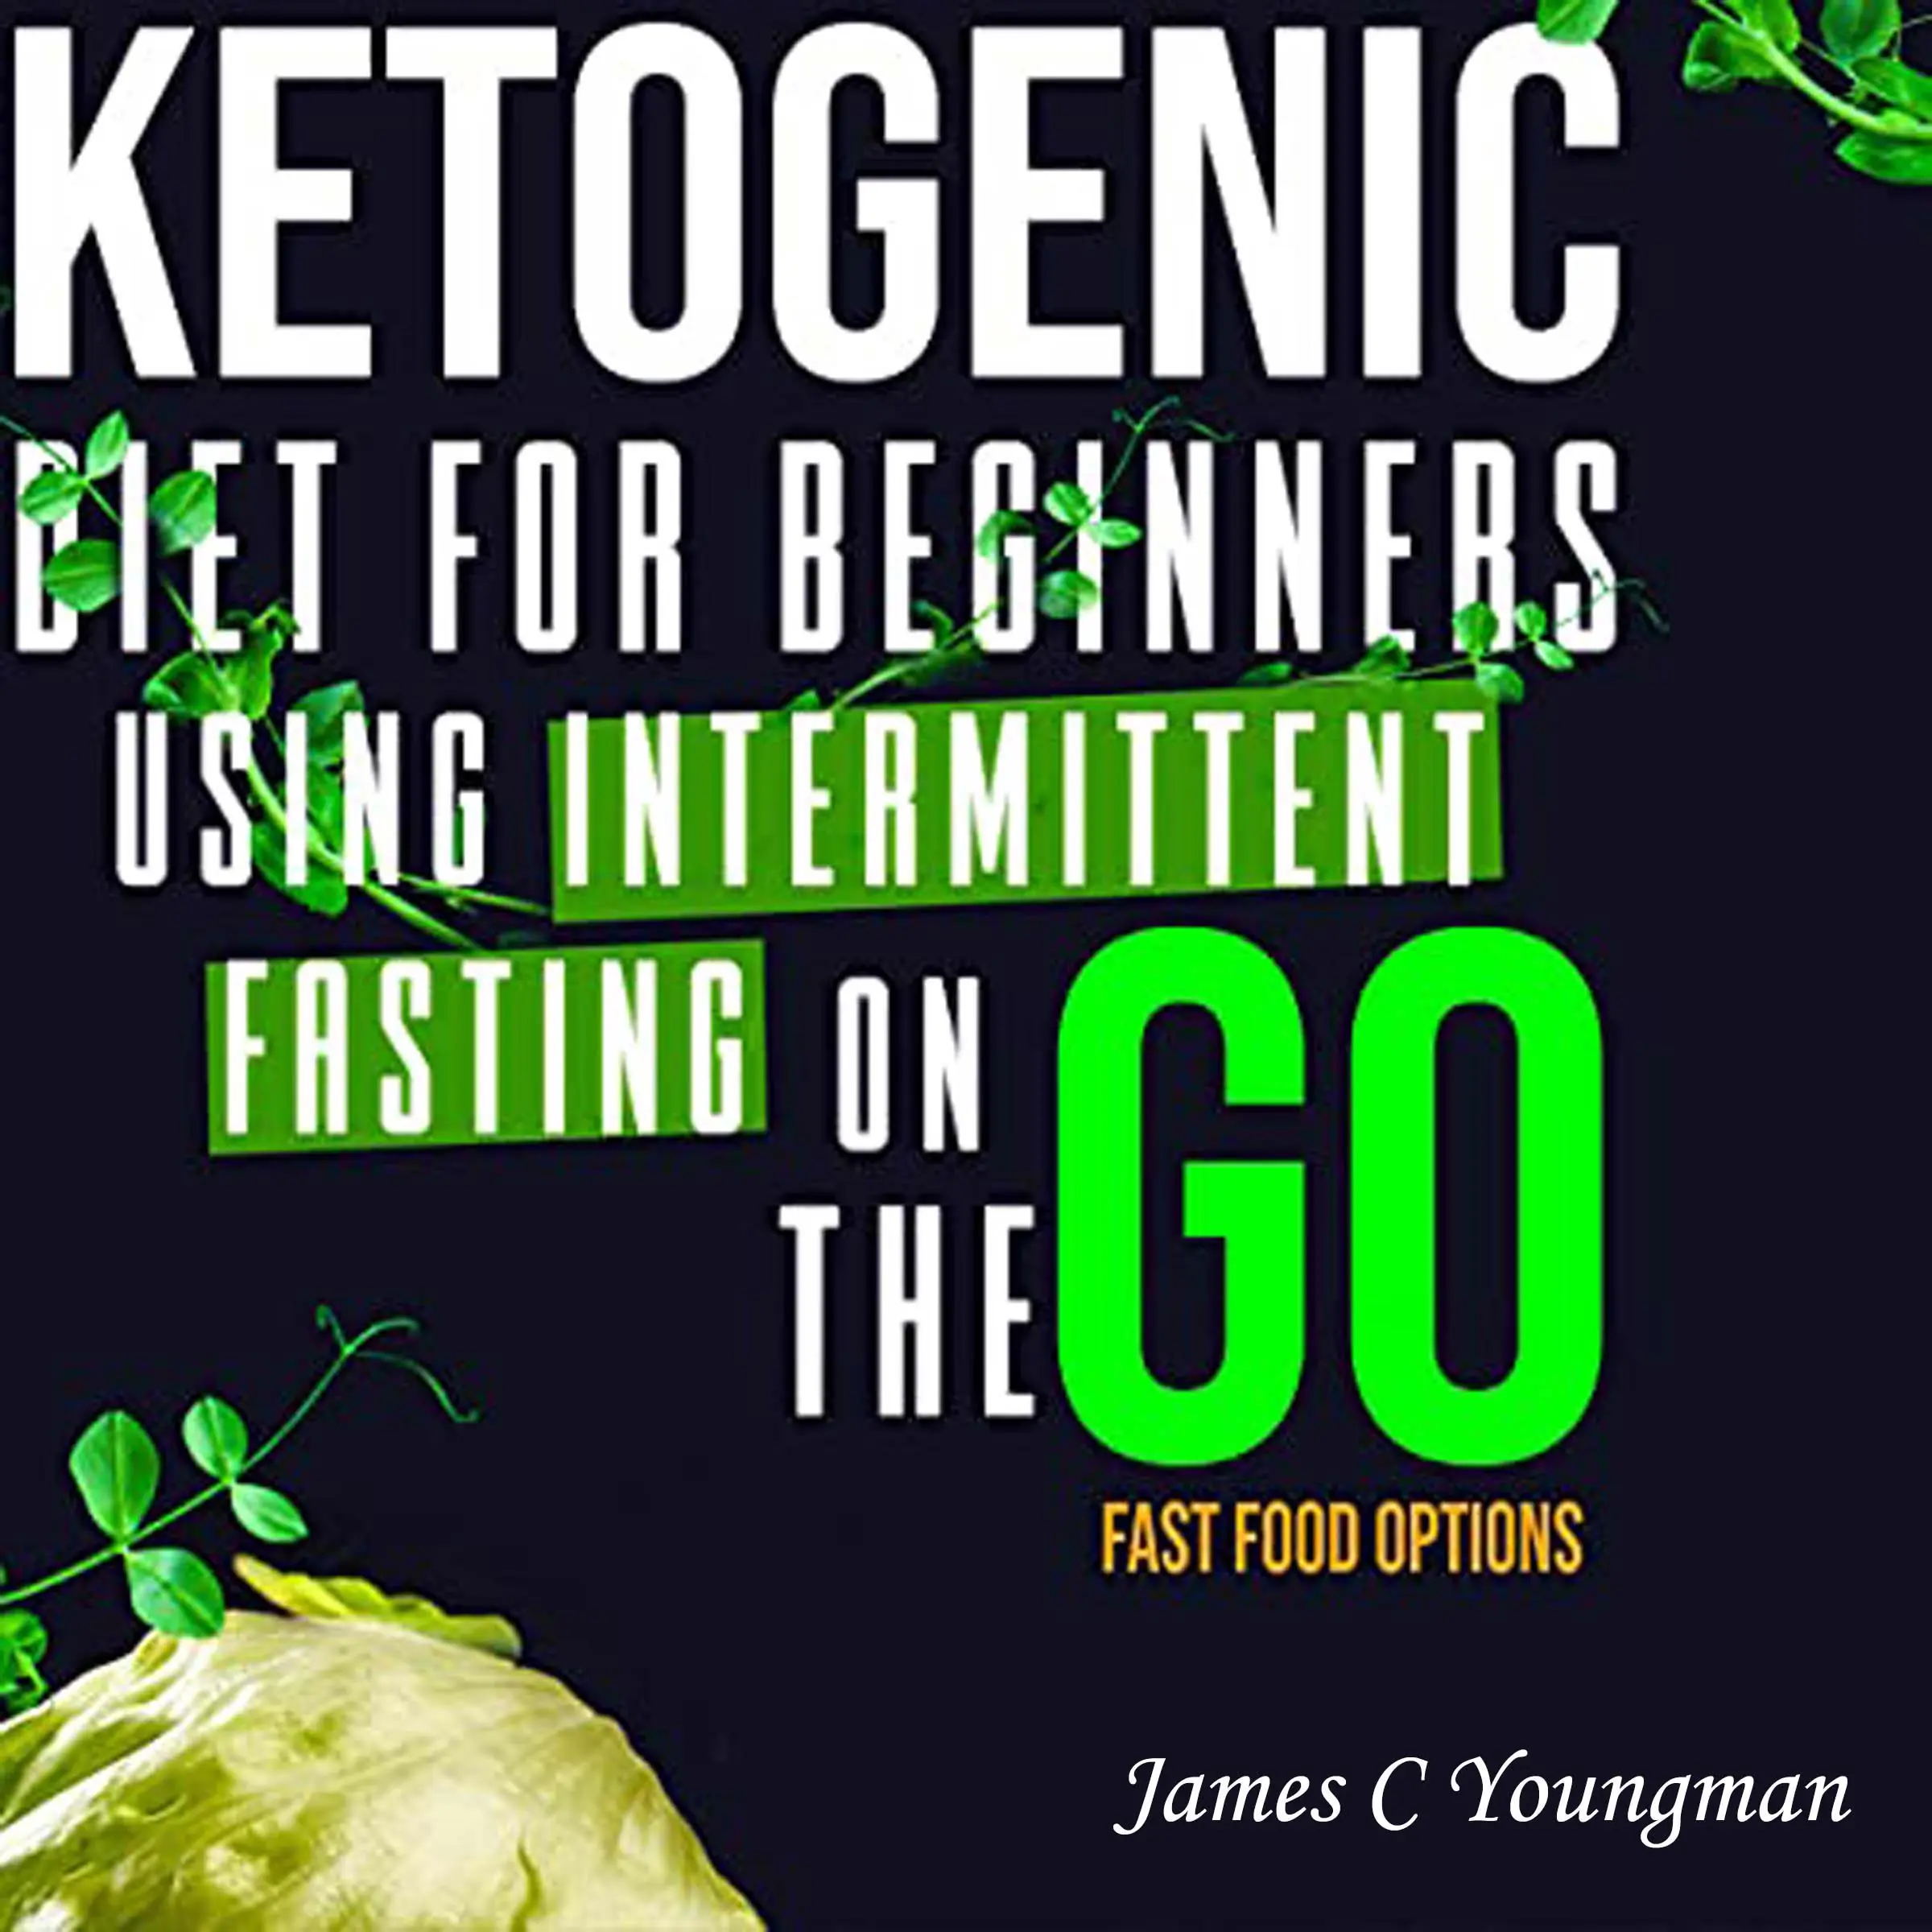 Ketogenic Diet for Beginners using Intermittent Fasting on the GO Fast Food Options Audiobook by James C Youngman